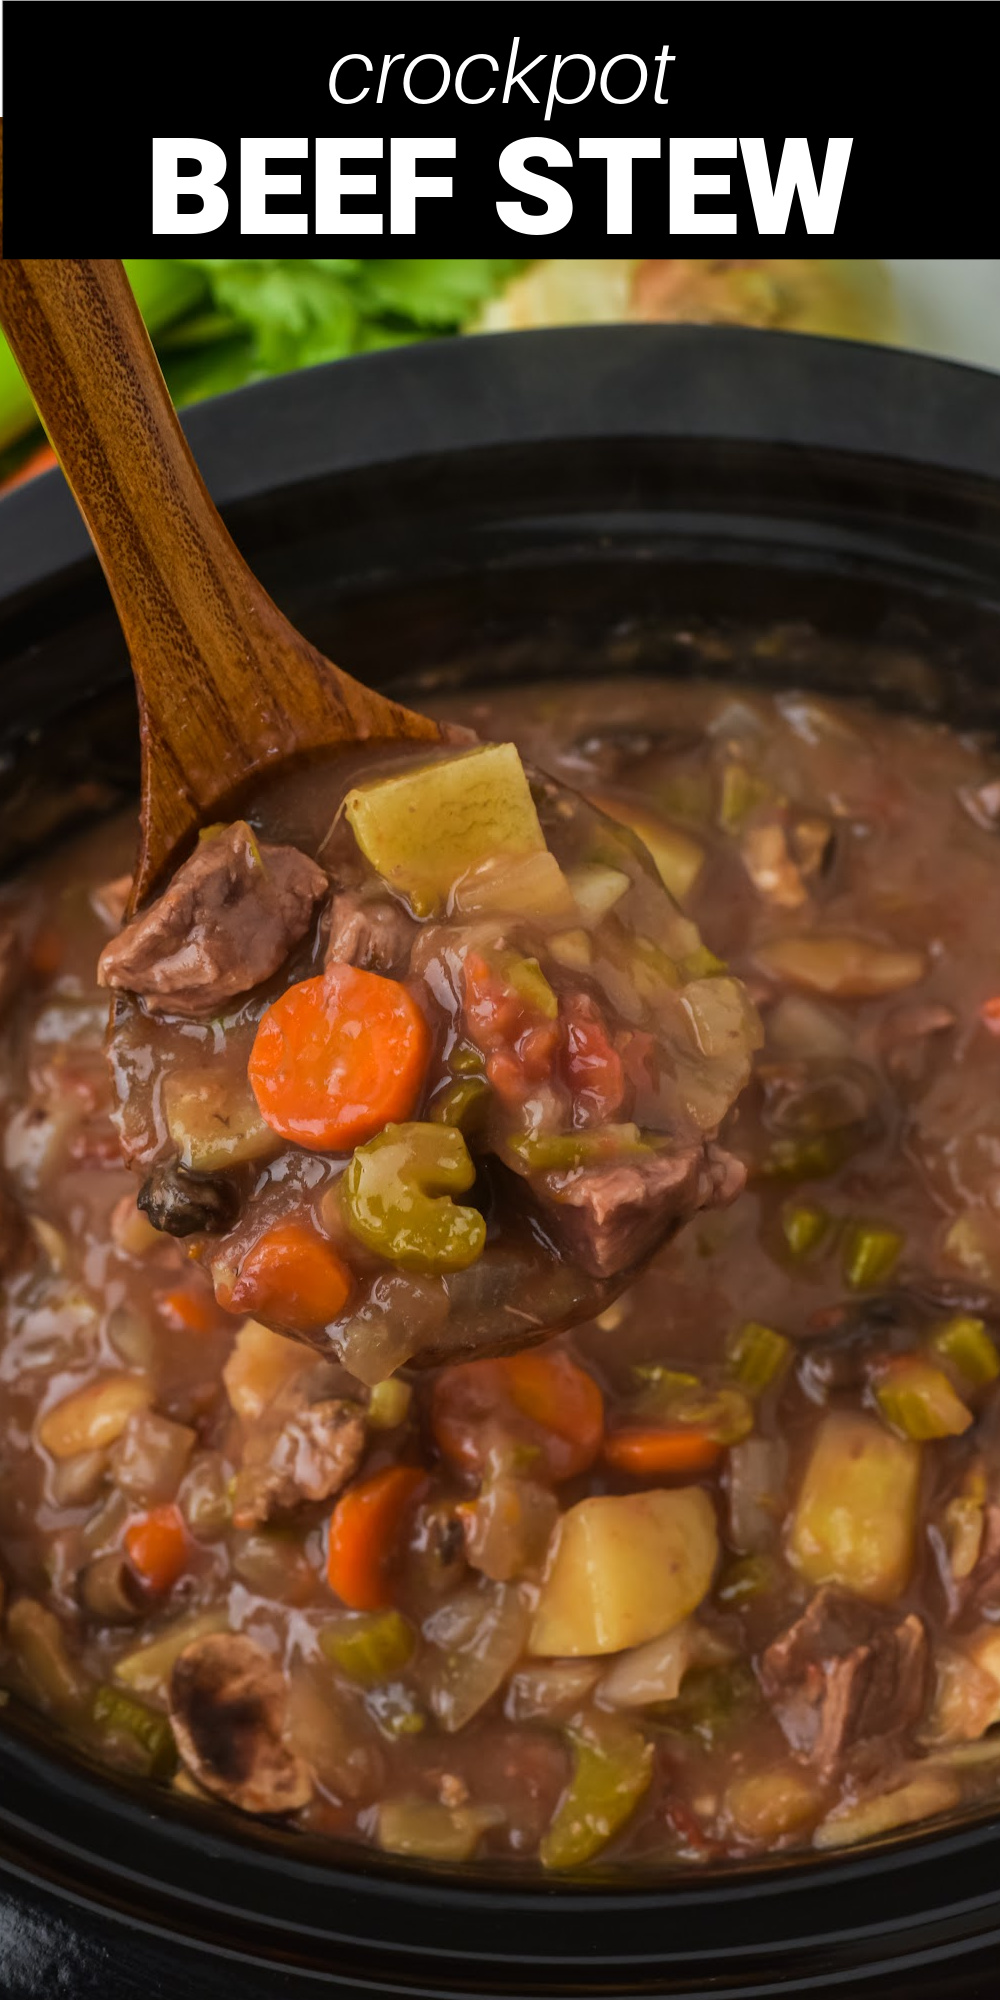 Nothing says comfort food on a cold night like a hot bowl of this homemade Crockpot Beef Stew. Tender chunks of beef, veggies, and potatoes cook together in a delicious tomato and beef broth. This is a flavorful one-pot hearty meal the whole family will love.